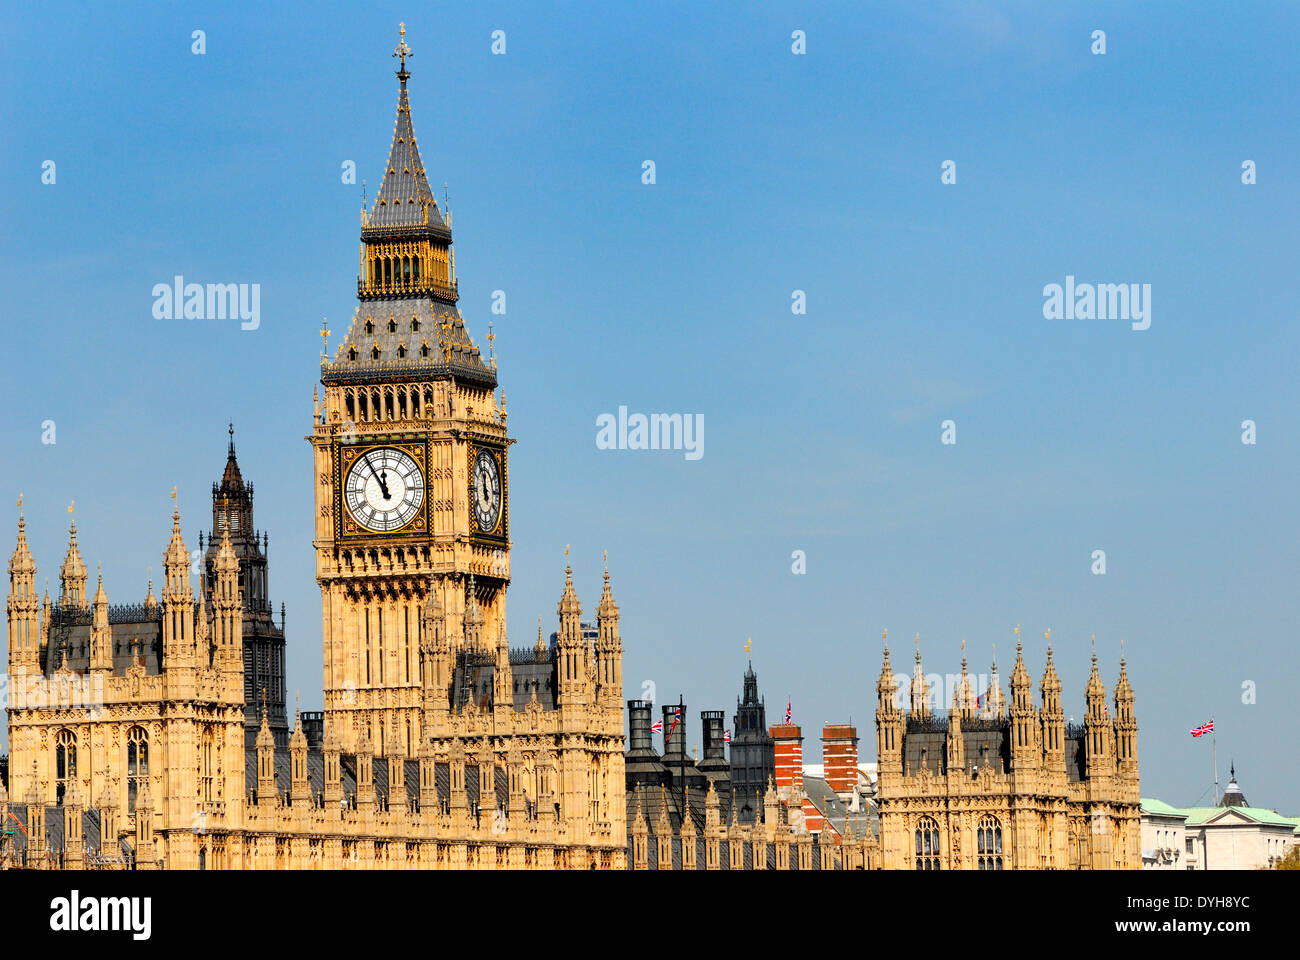 London, England, UK. Big Ben and the Houses of Parliament seen from across the river Stock Photo